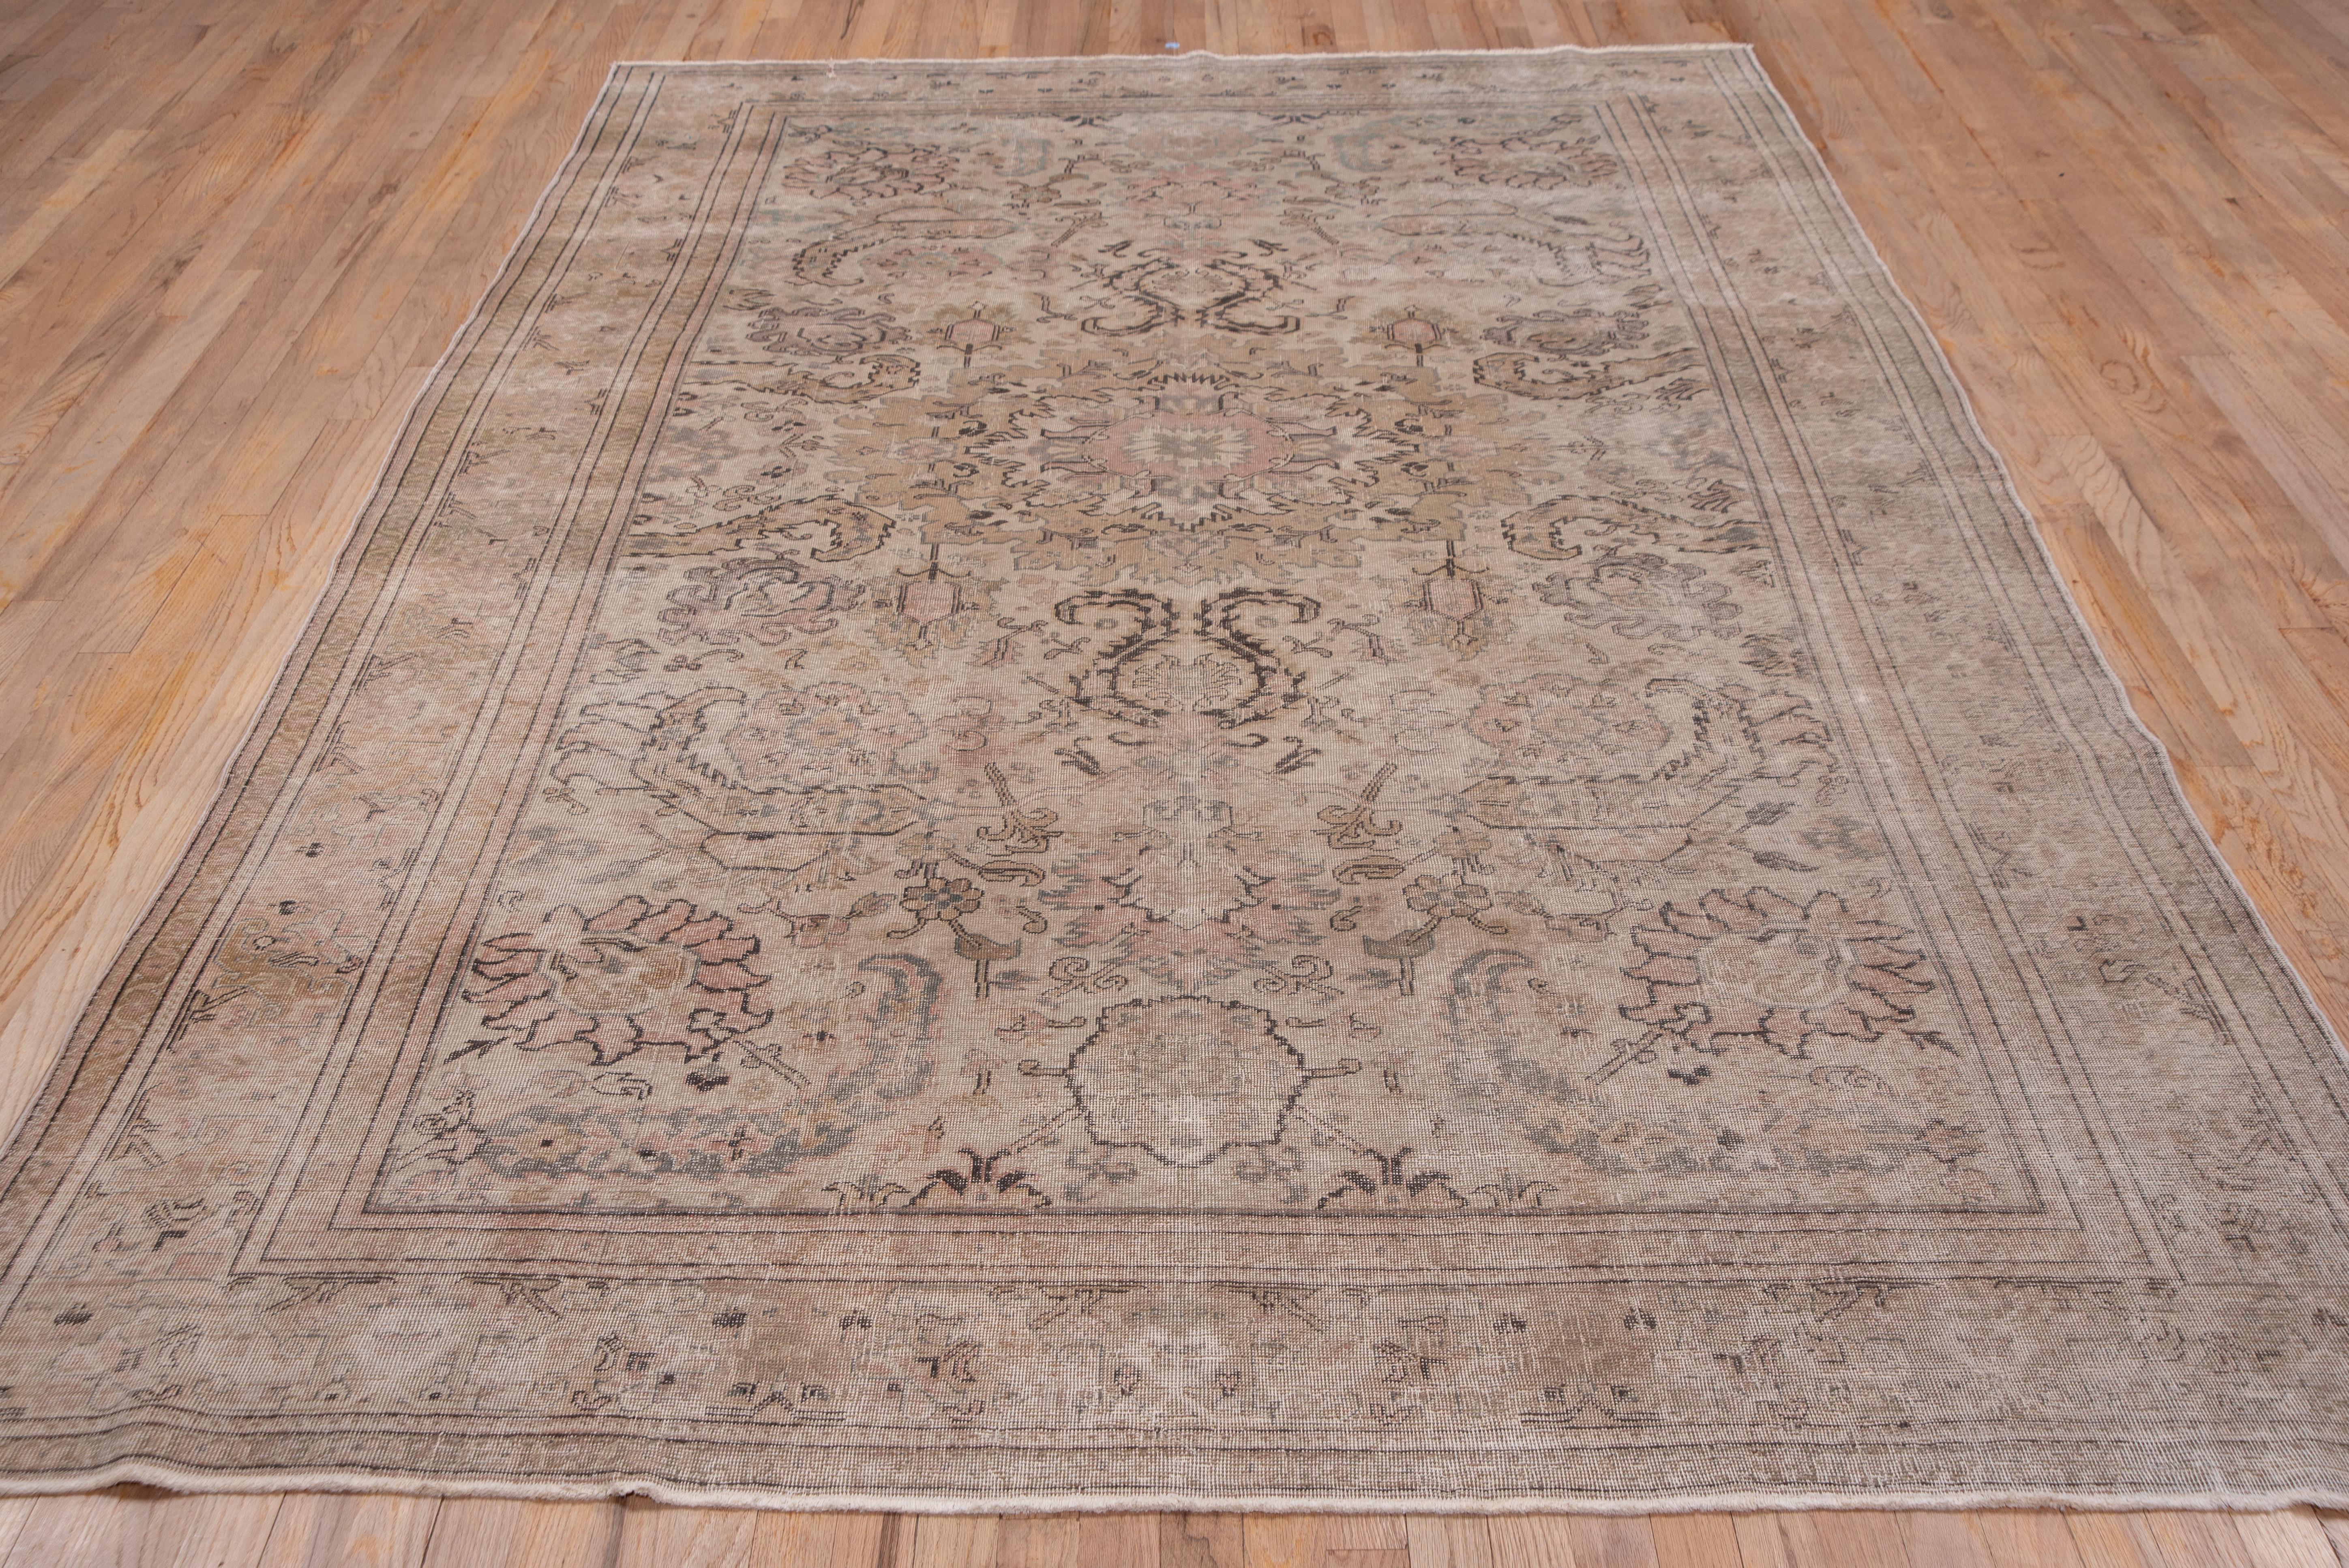 Turkish Antique Kaisary Carpet with Soft Tones